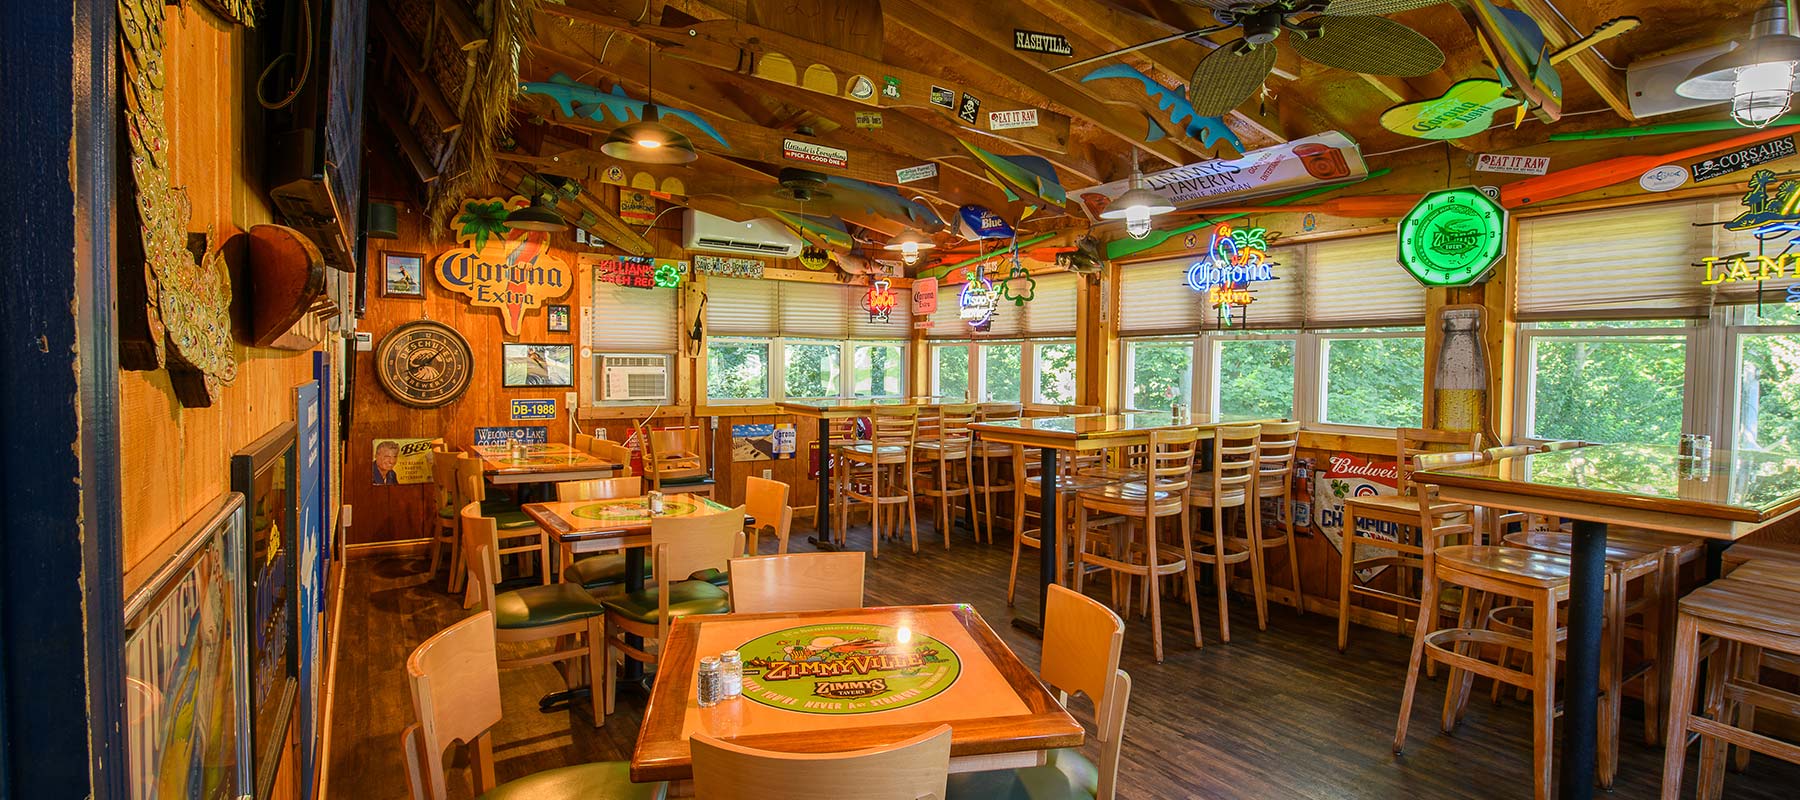 A bright, cheerful dining room at Zimmy's Tavern